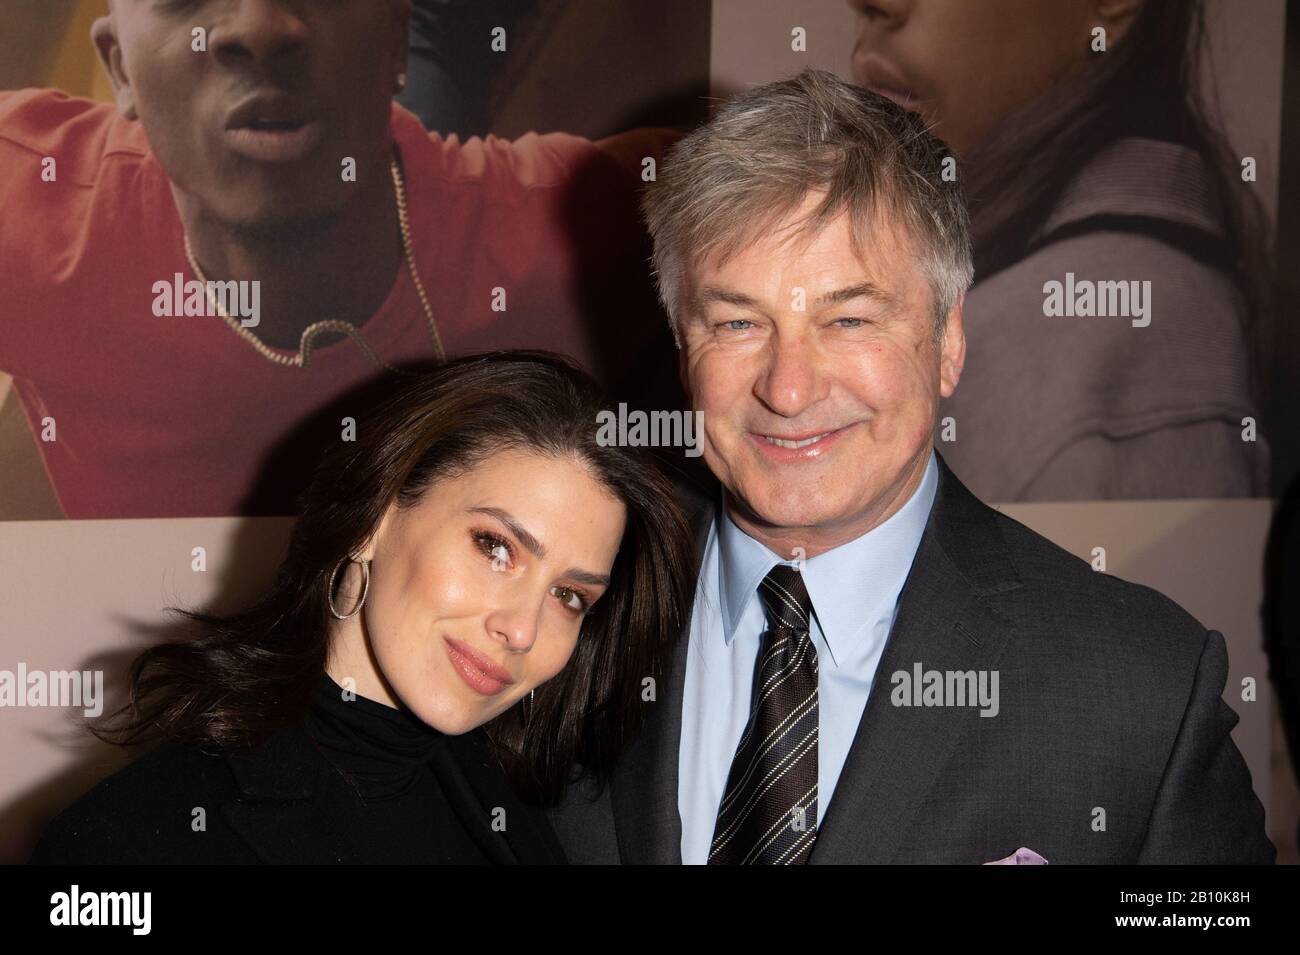 New York, United States. 21st Feb, 2020. Hilaria Baldwin and Alec Baldwin attend the opening night of 'West Side Story' on Broadway at The Broadway Theatre in New York City. Credit: SOPA Images Limited/Alamy Live News Stock Photo